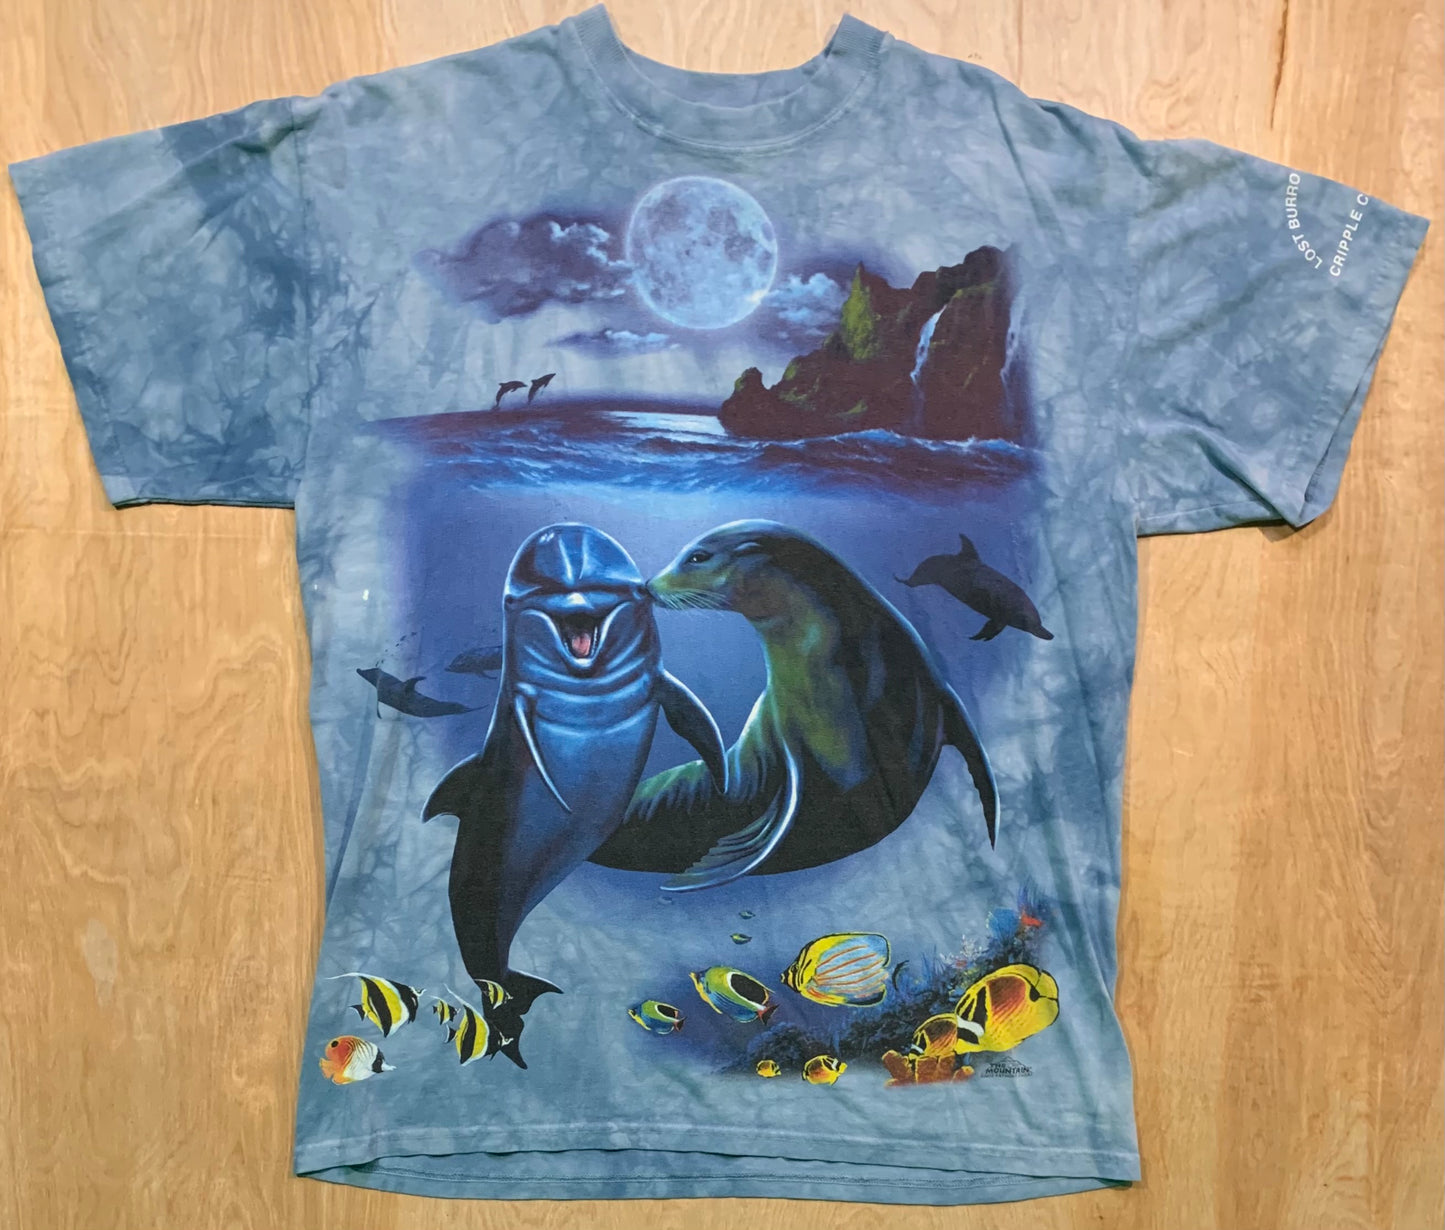 2002 "The Mountains" Ocean Single Stitch T-shirt